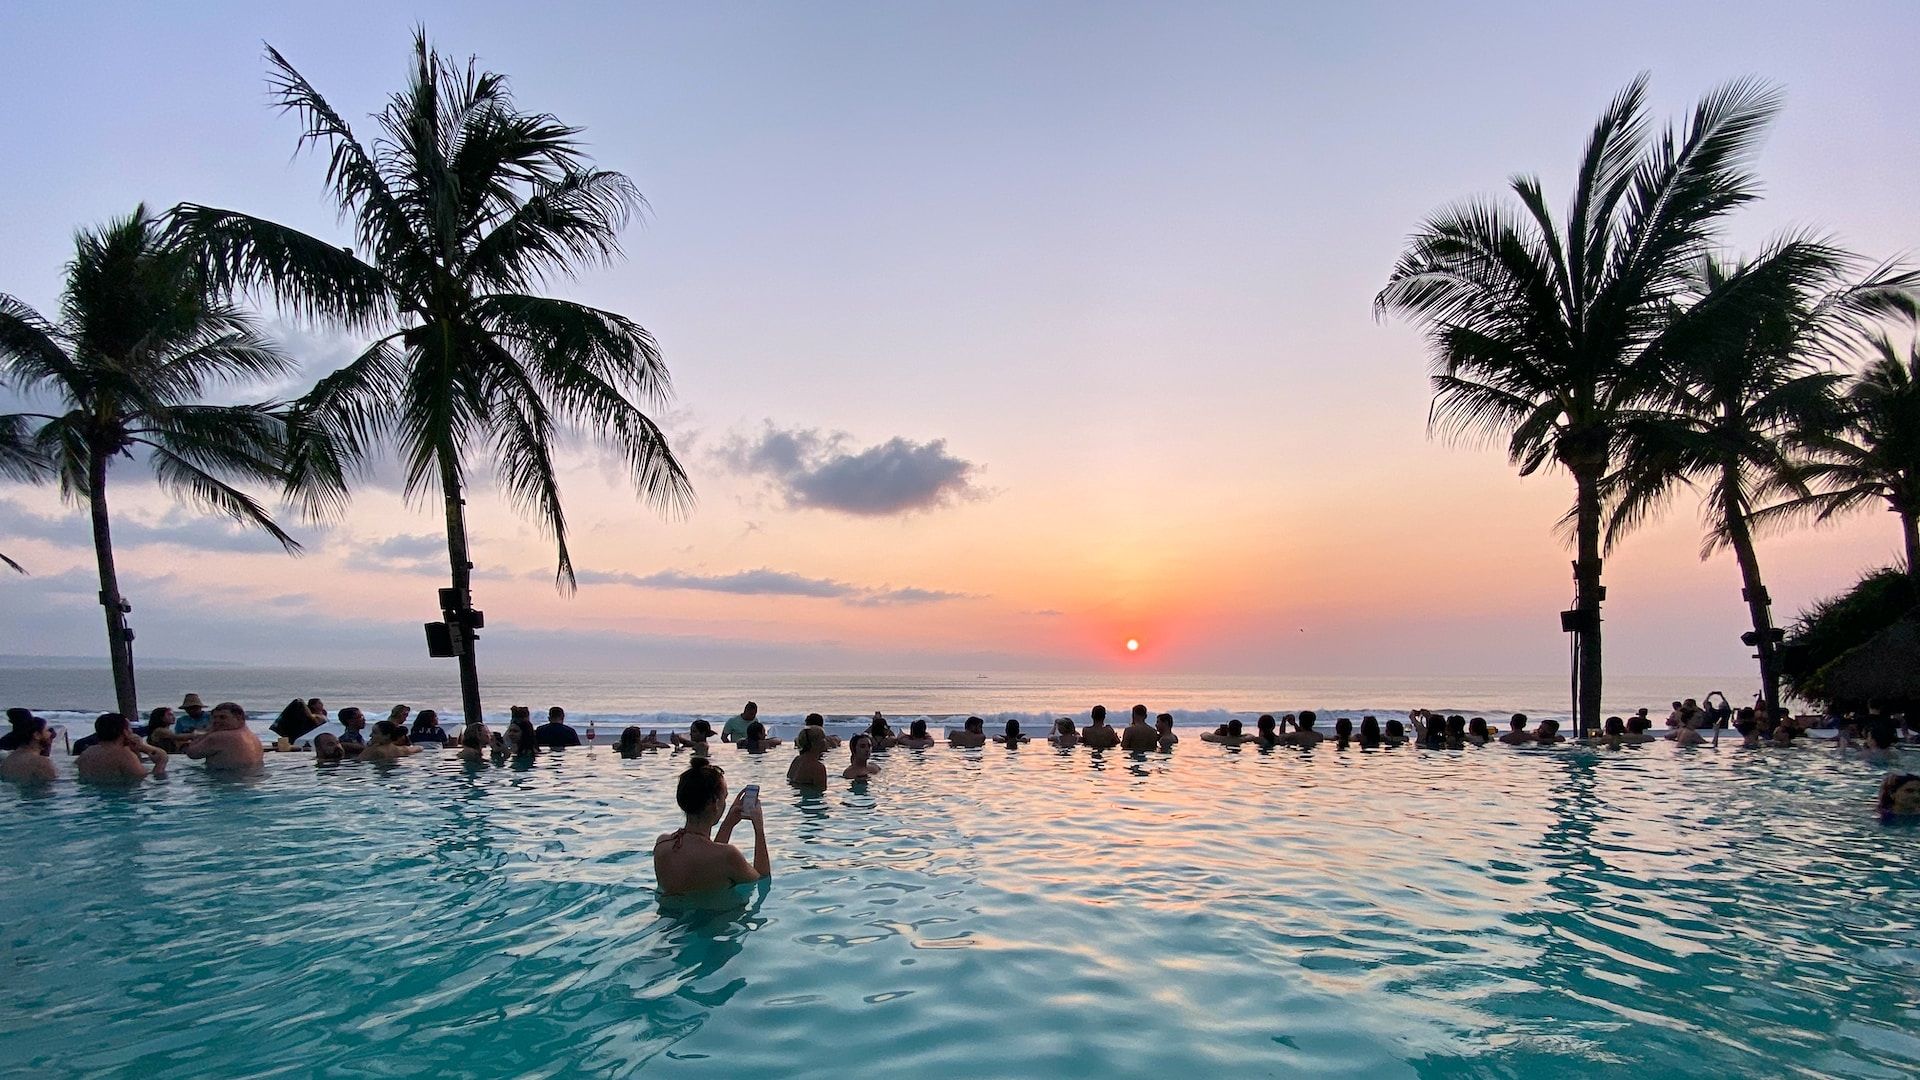 Sunset at a pool at a hotel in Seminyak Beach, Bali, Indonesia 